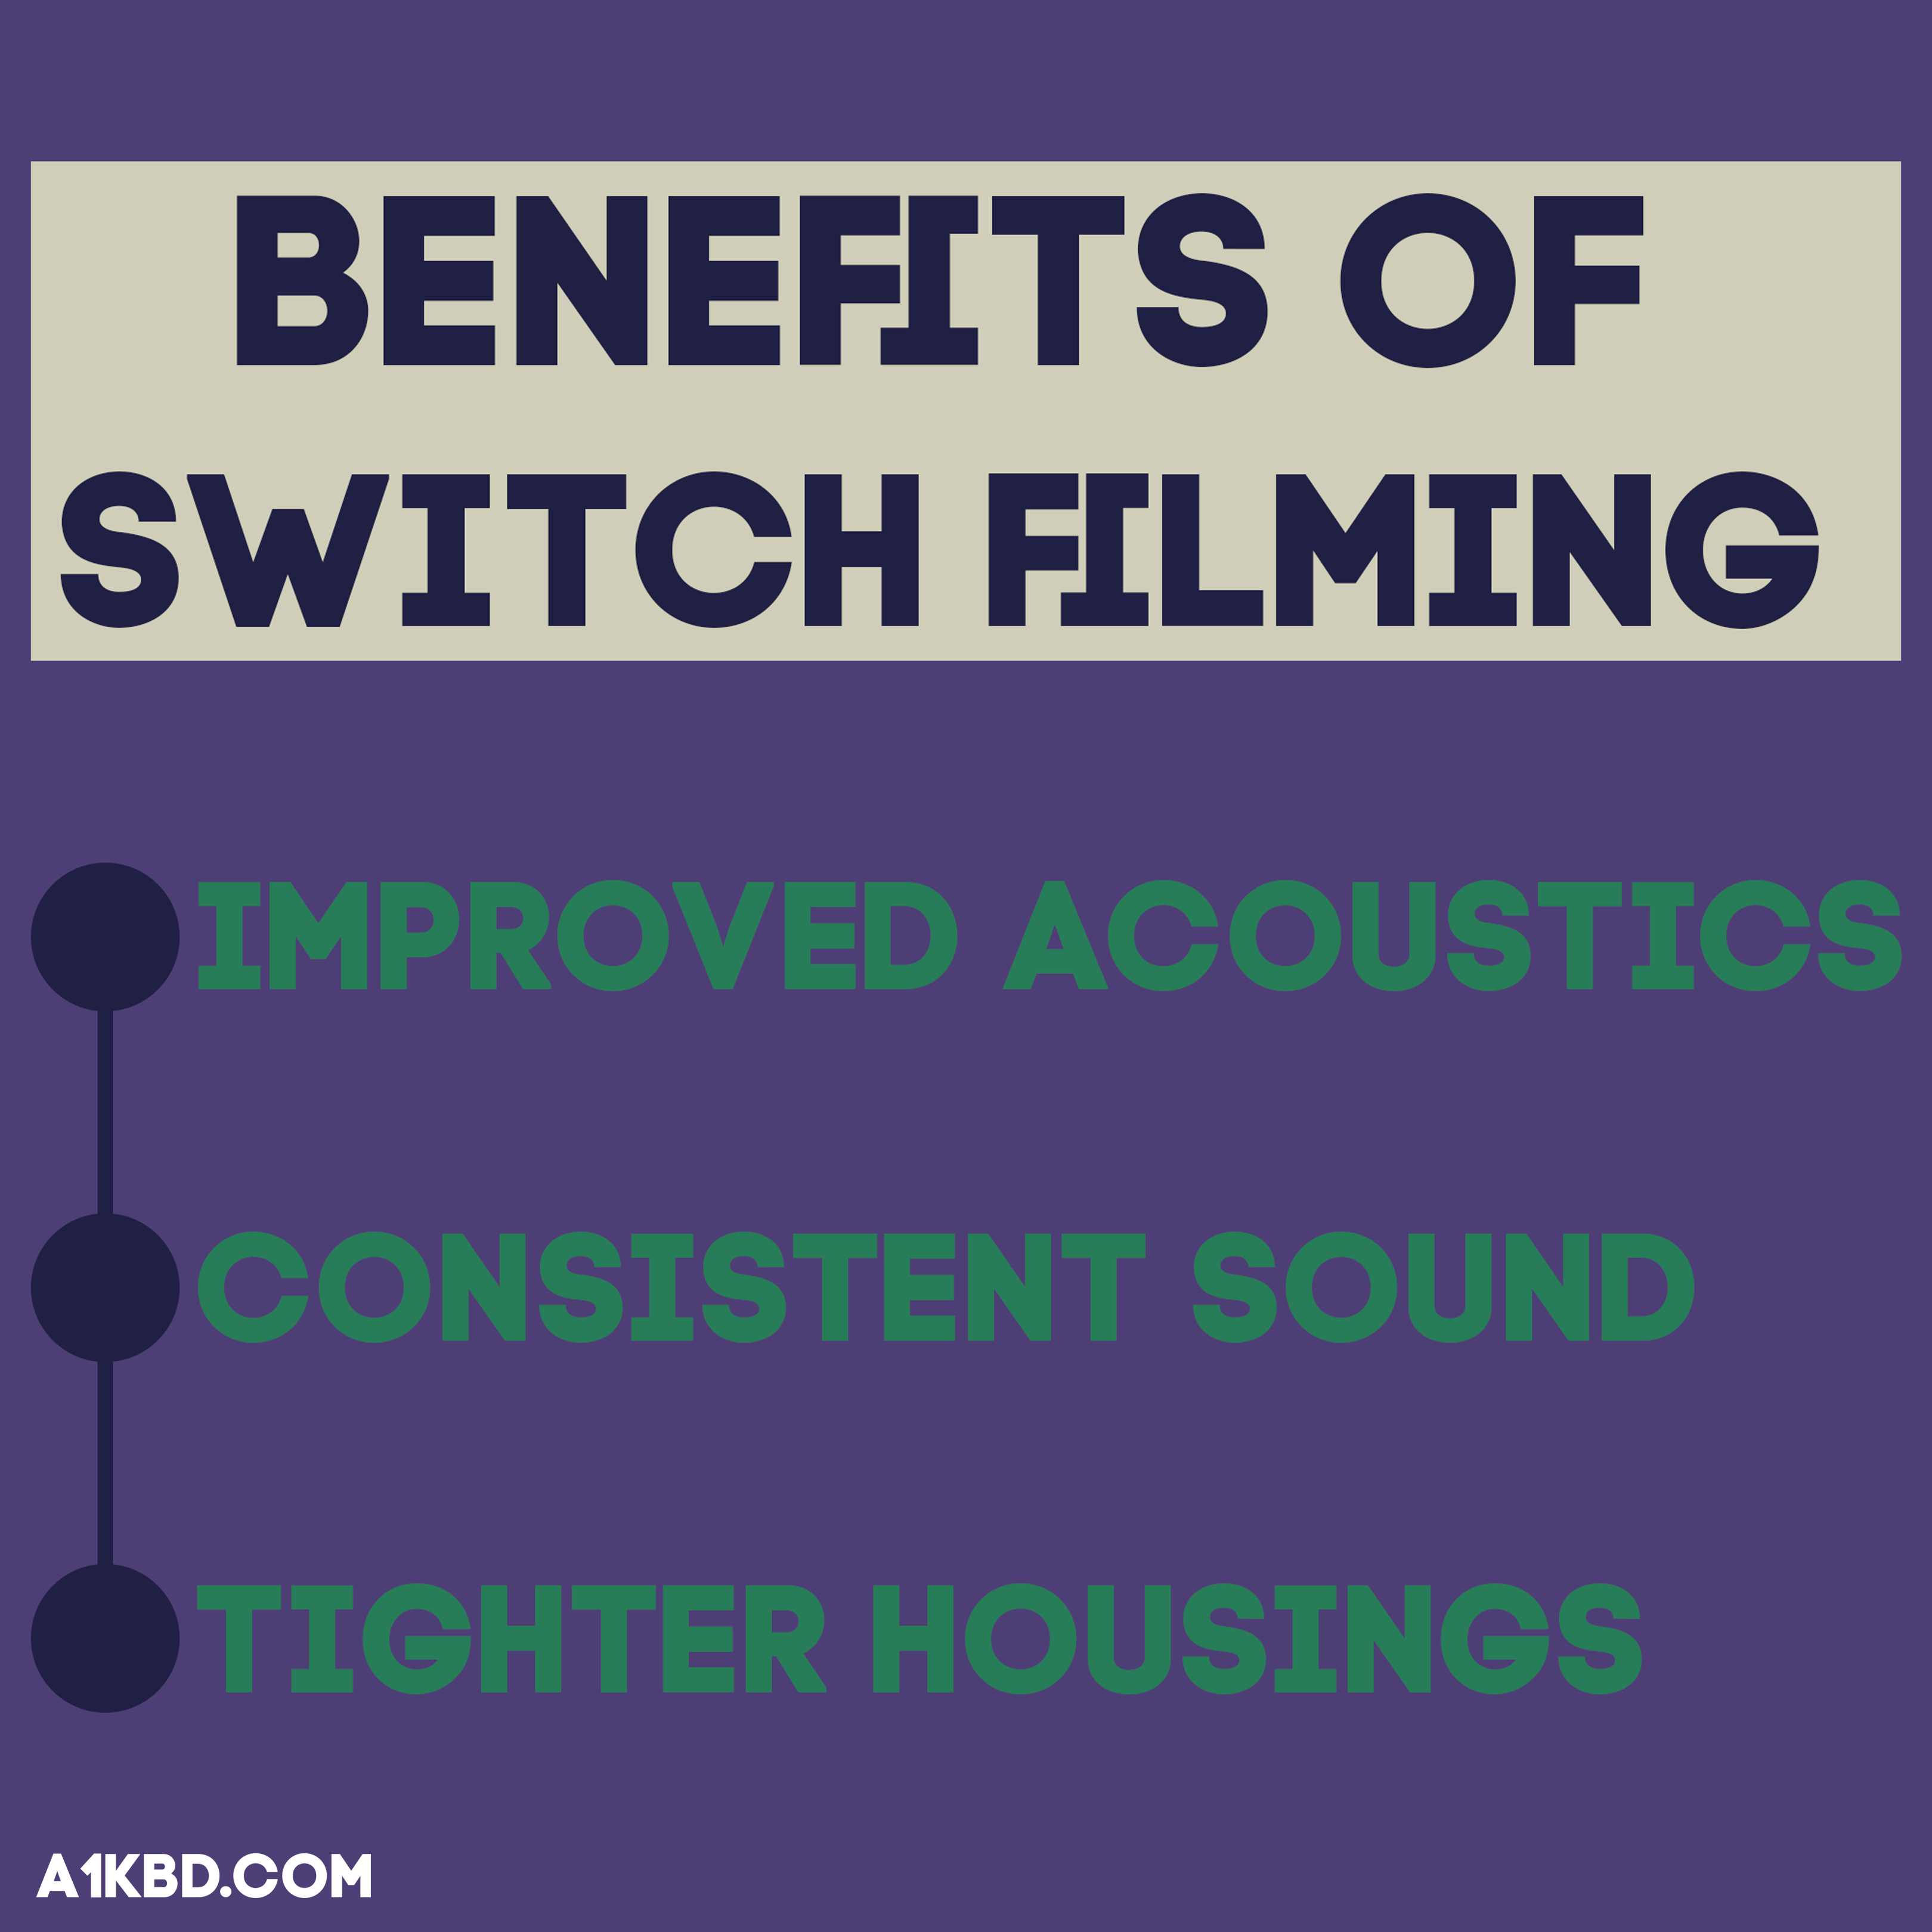 Benefits of filming switches.